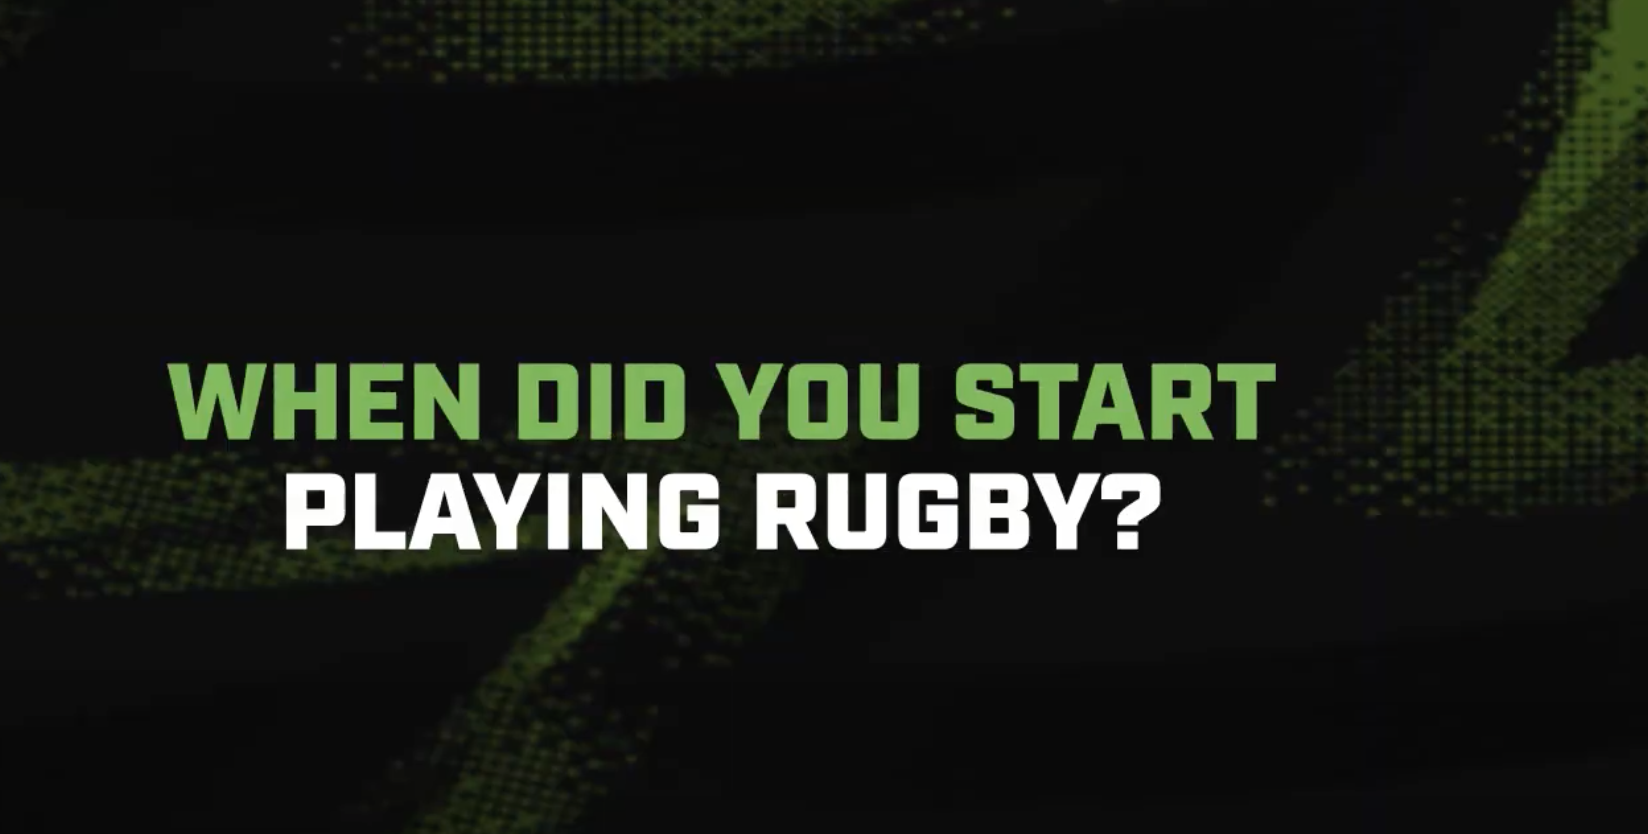 When did you start playing rugby?